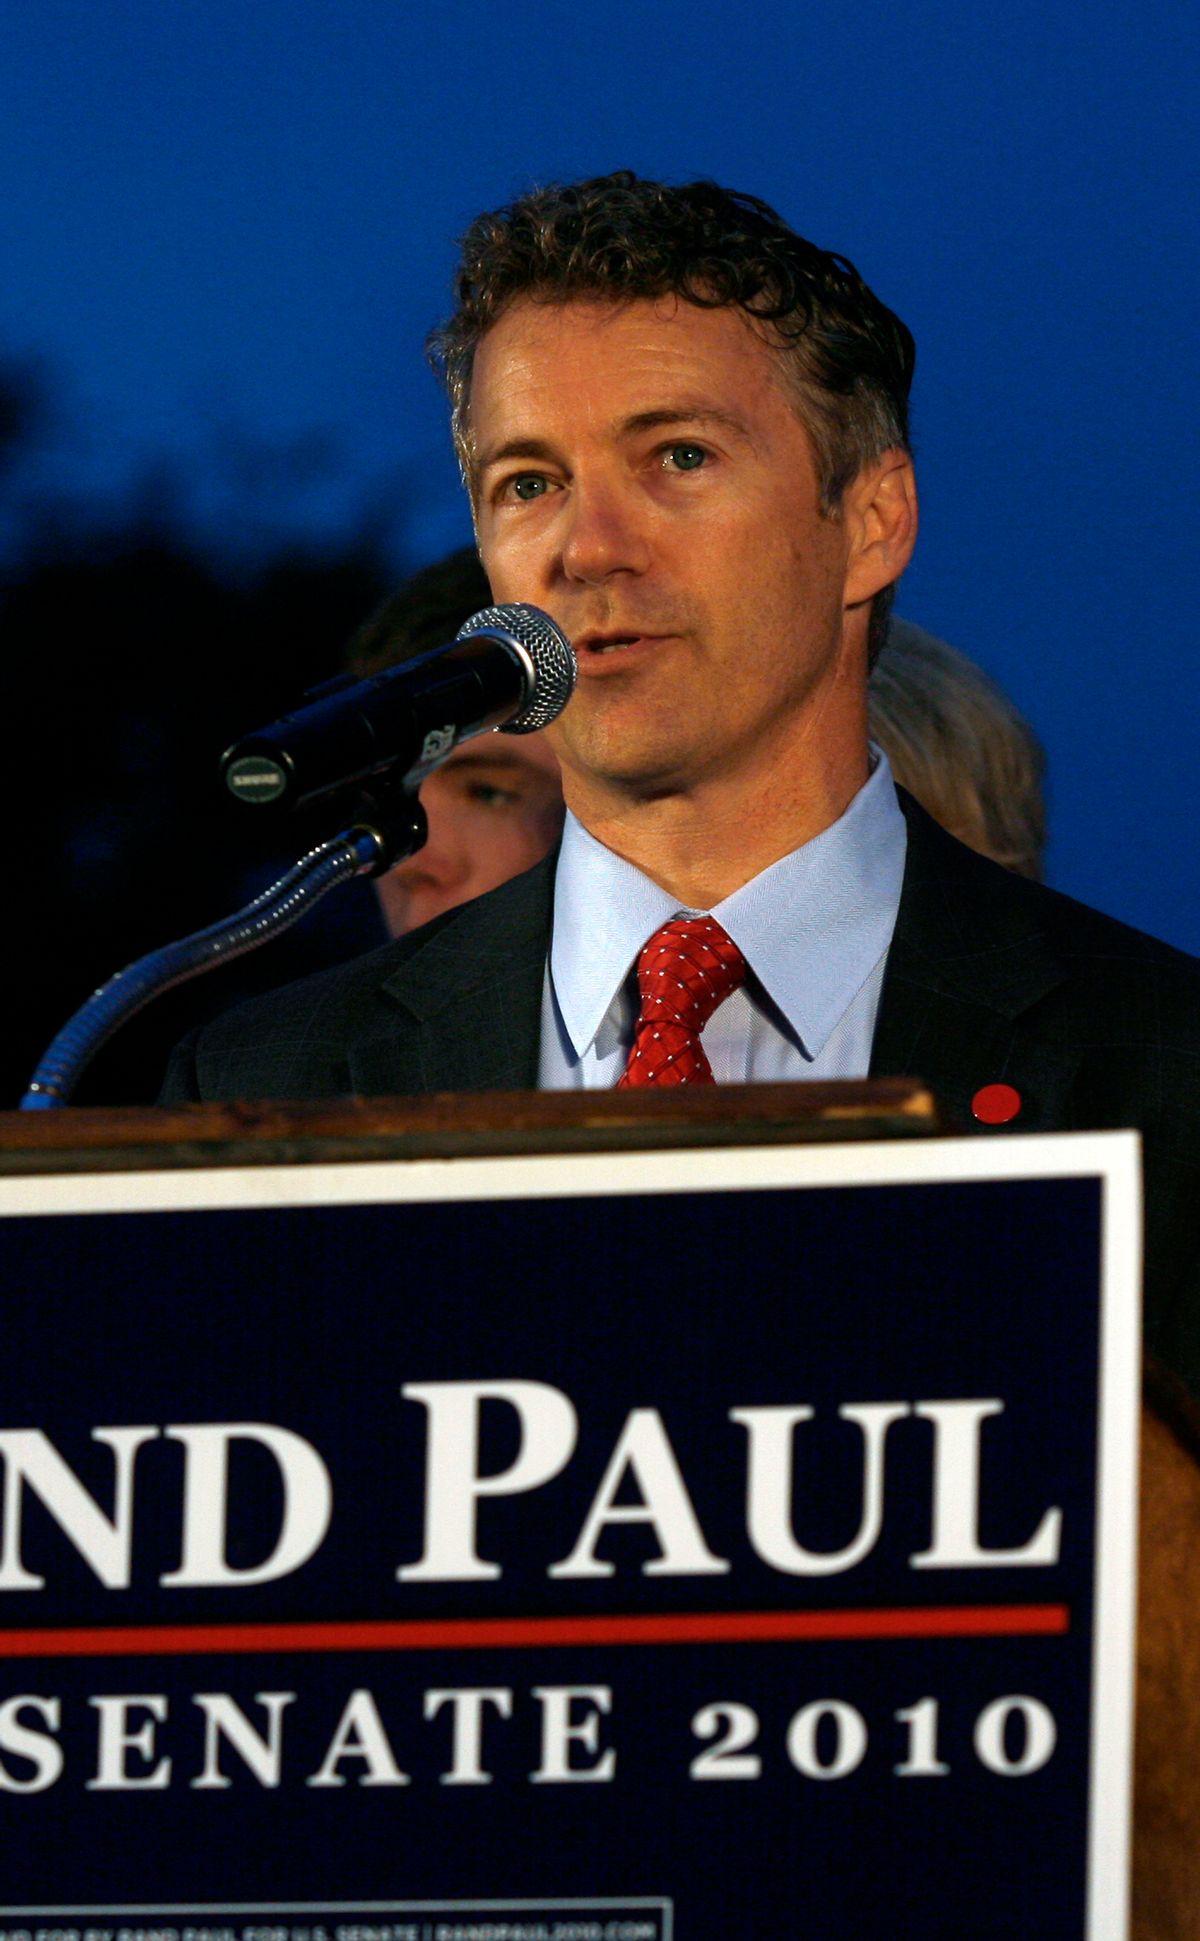 Rand Paul gives his victory speech after winning the Senate Republican primary election in Bowling Green, Kentucky, at Bowling Green Country Club May 18, 2010. Rand Paul, a doctor and son of libertarian Republican Representative Ron, beat Kentucky Secretary of State Trey Grayson for the Republican nomination for an open U.S. Senate seat in a race seen as an early test of the strength of the movement.           REUTERS/Jake Stevens   (UNITED STATES - Tags: POLITICS ELECTIONS) (Reuters)